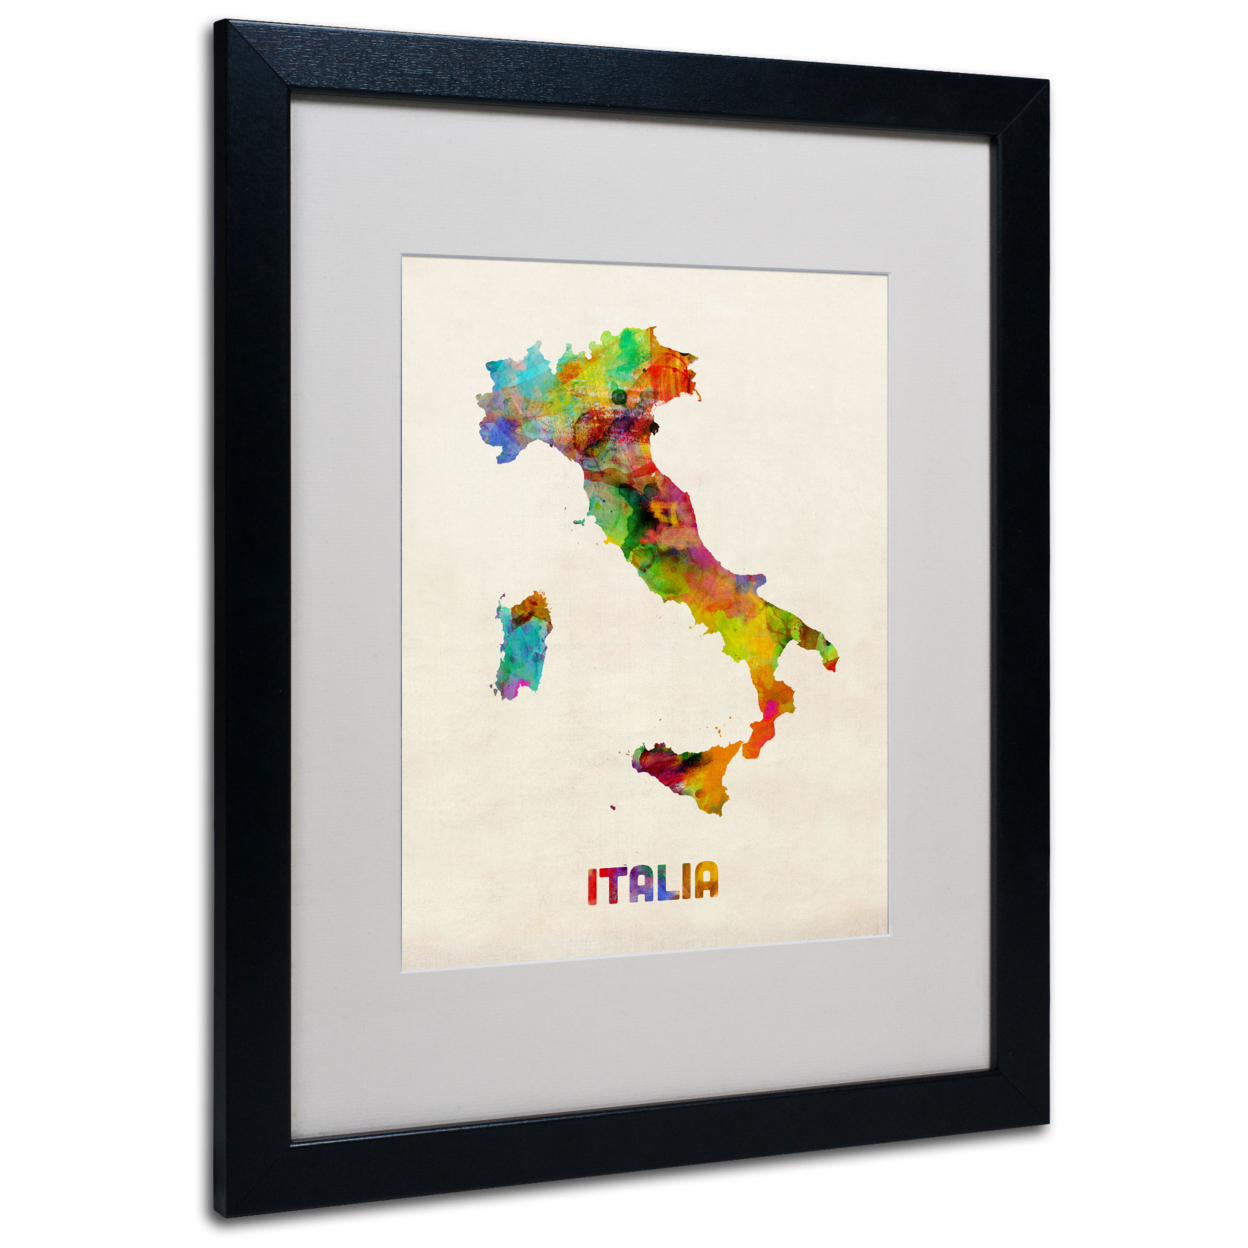 Michael Tompsett 'Italy Watercolor Map' Black Wooden Framed Art 18 X 22 Inches